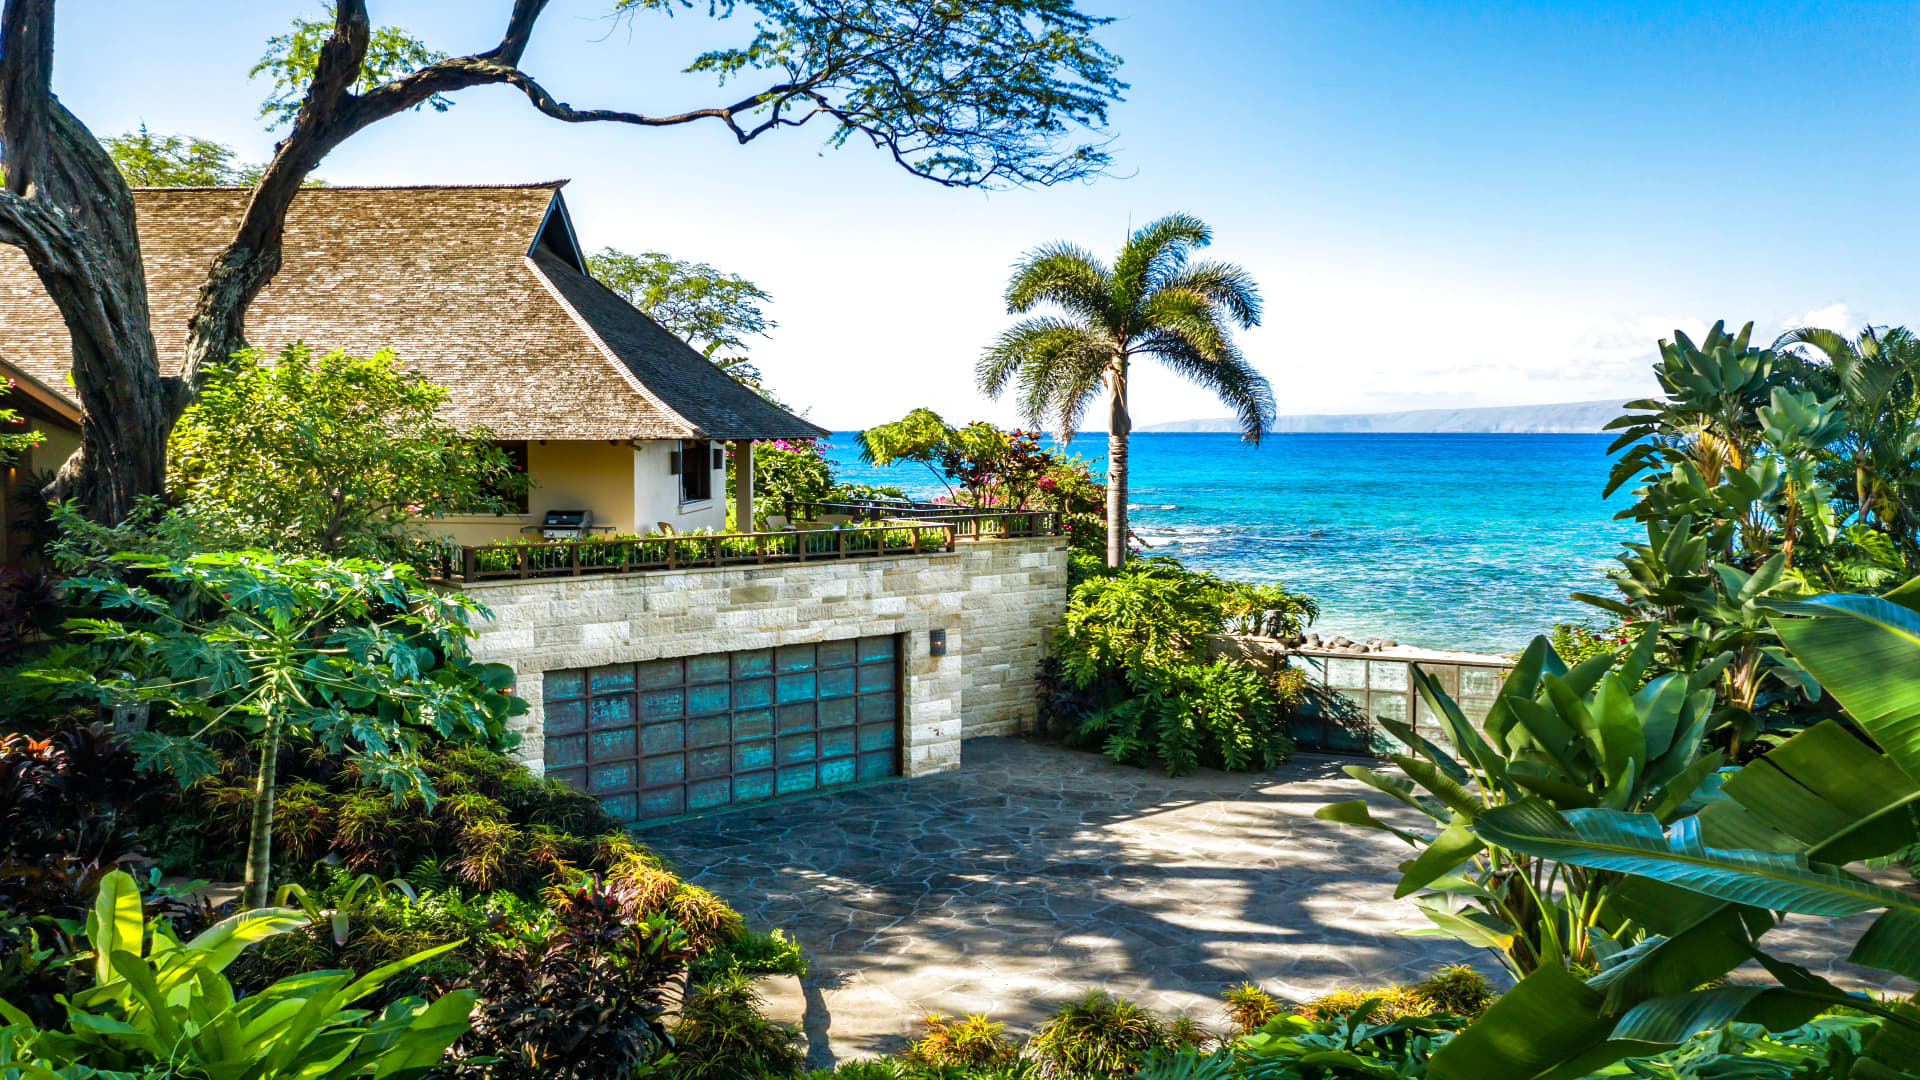 This mansion in Maui has five bedrooms, five and a half baths, and an ocean view. It recently sold for $12.5 million.